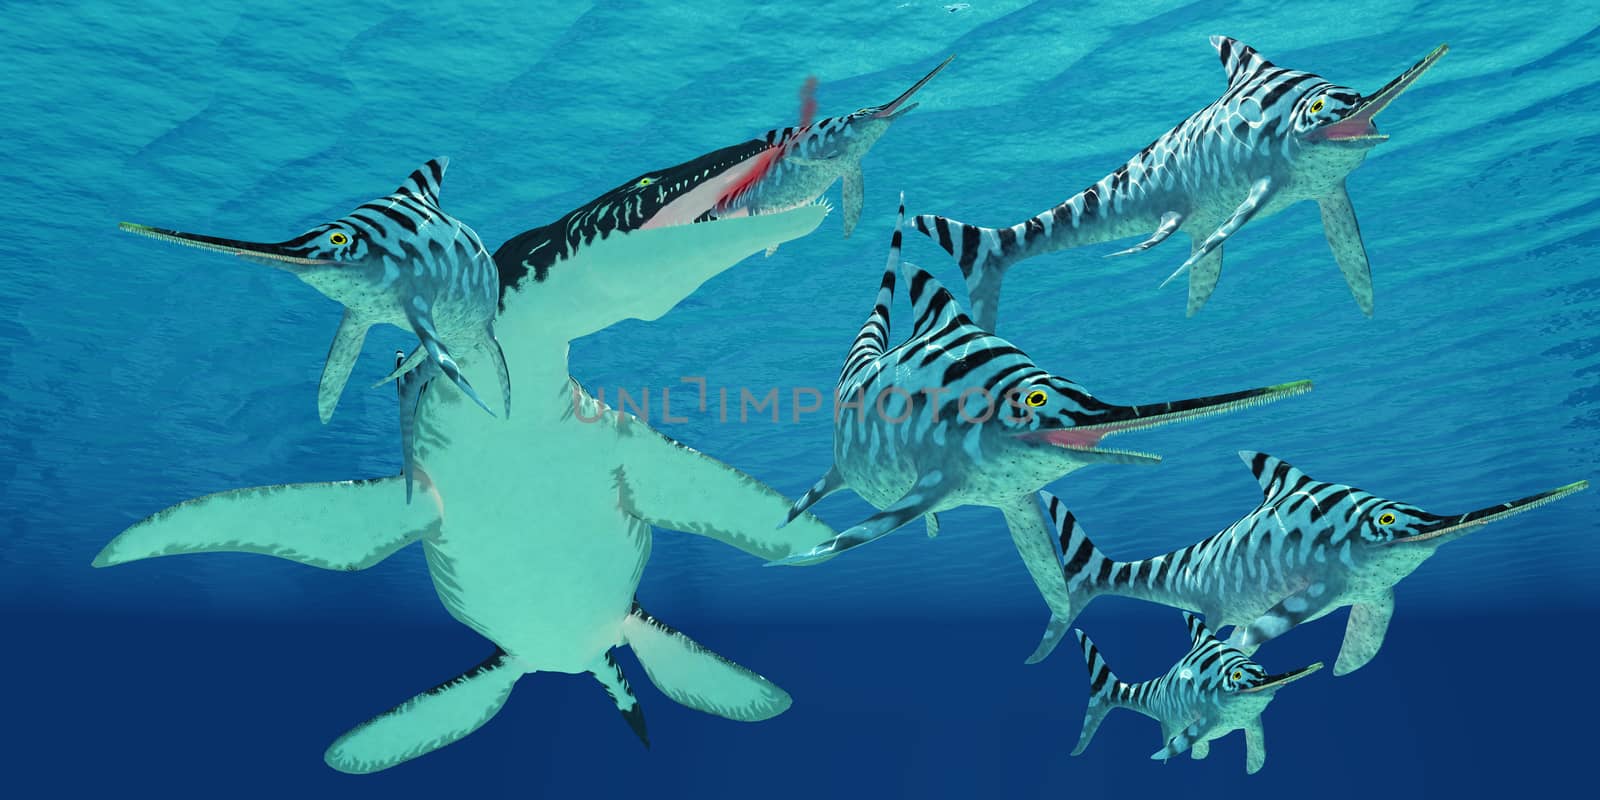 A pod of Eurhinosaurus marine reptiles try to evade the much larger Liopleurodon in Jurassic seas.